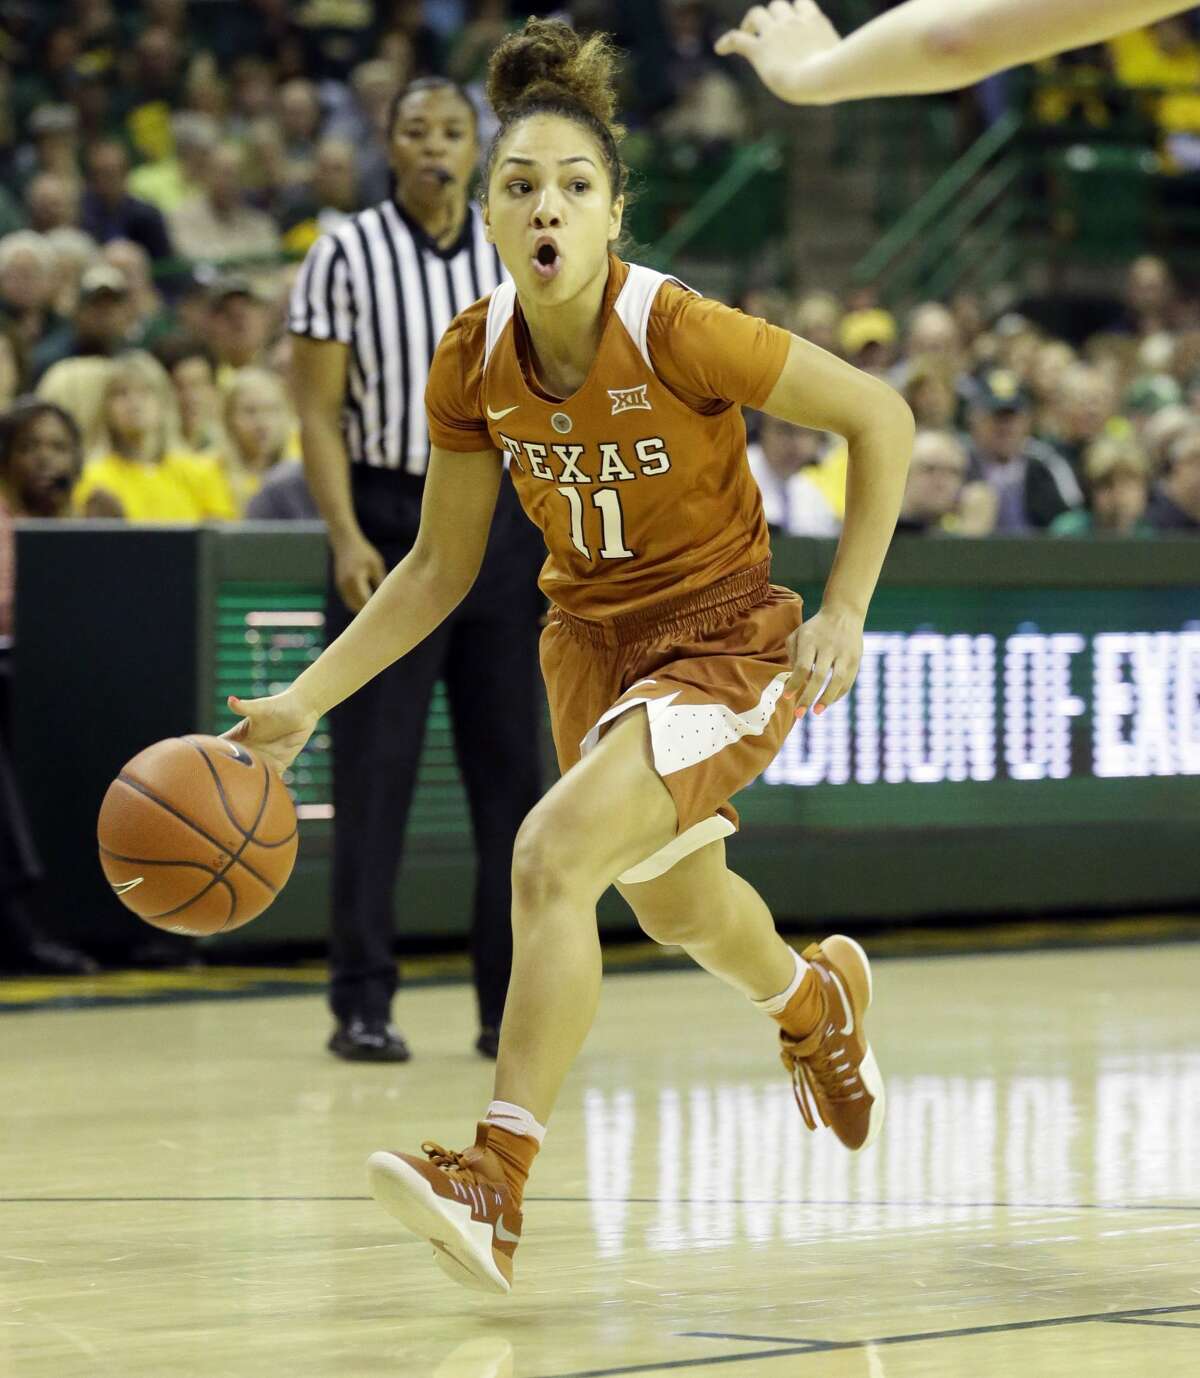 Texas guard Brooke McCarty (11) dribbles during the second half of an NCAA college basketball game against Baylor in Waco, Texas, Monday, Feb. 6, 2017. (AP Photo/LM Otero)